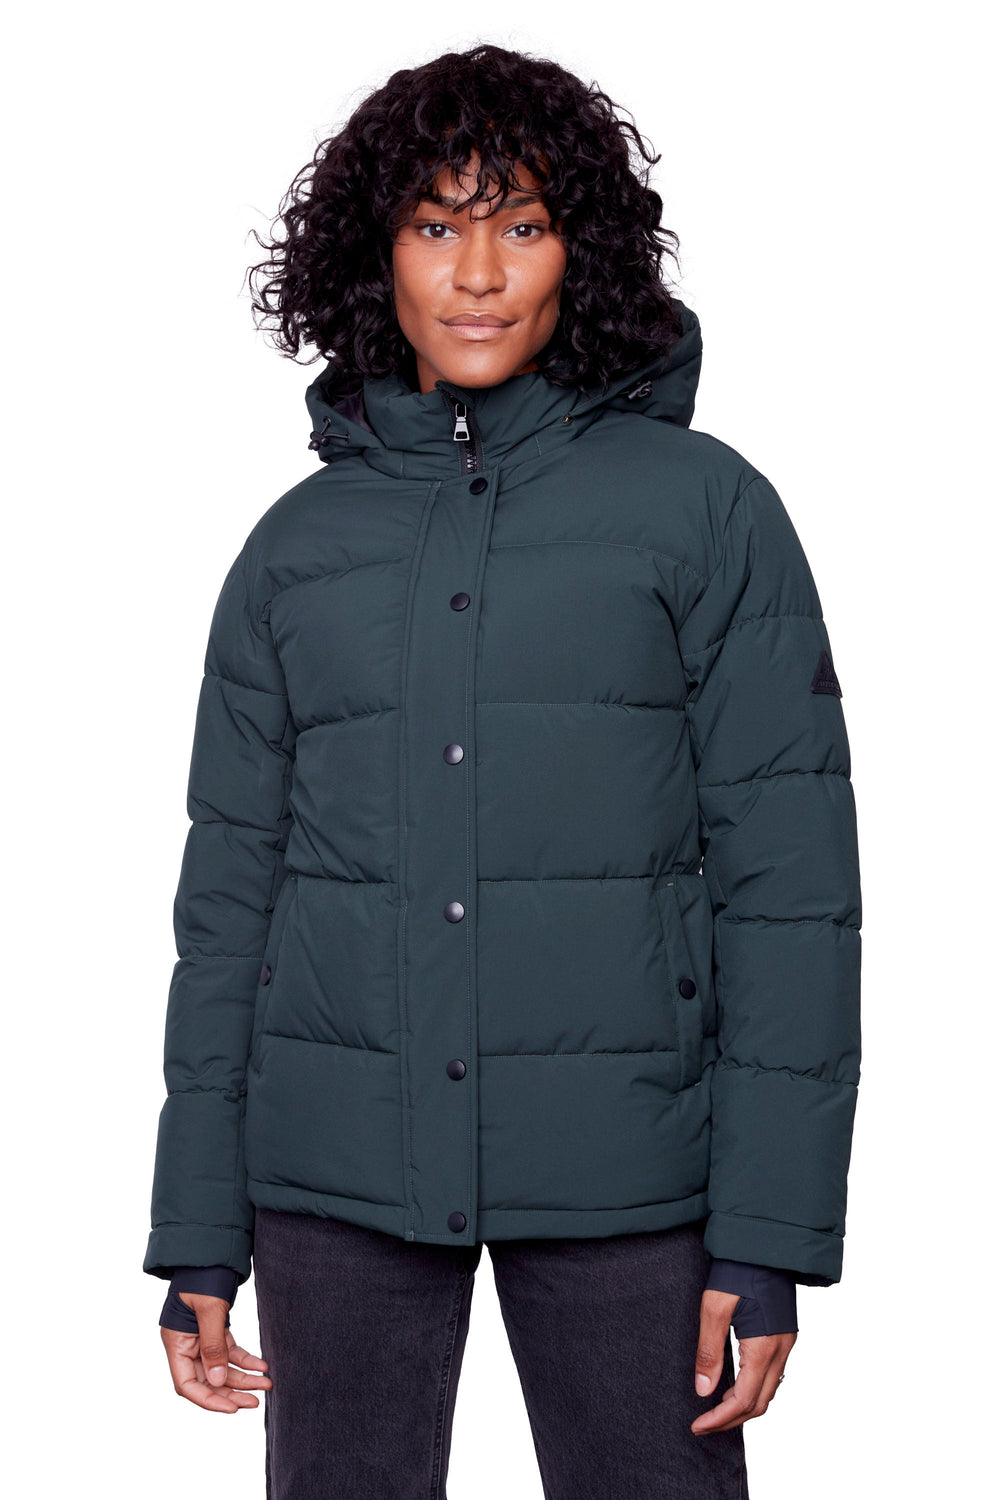 Alpine North (Recycled) Midweight Rain Shell Jacket, Dusty Green